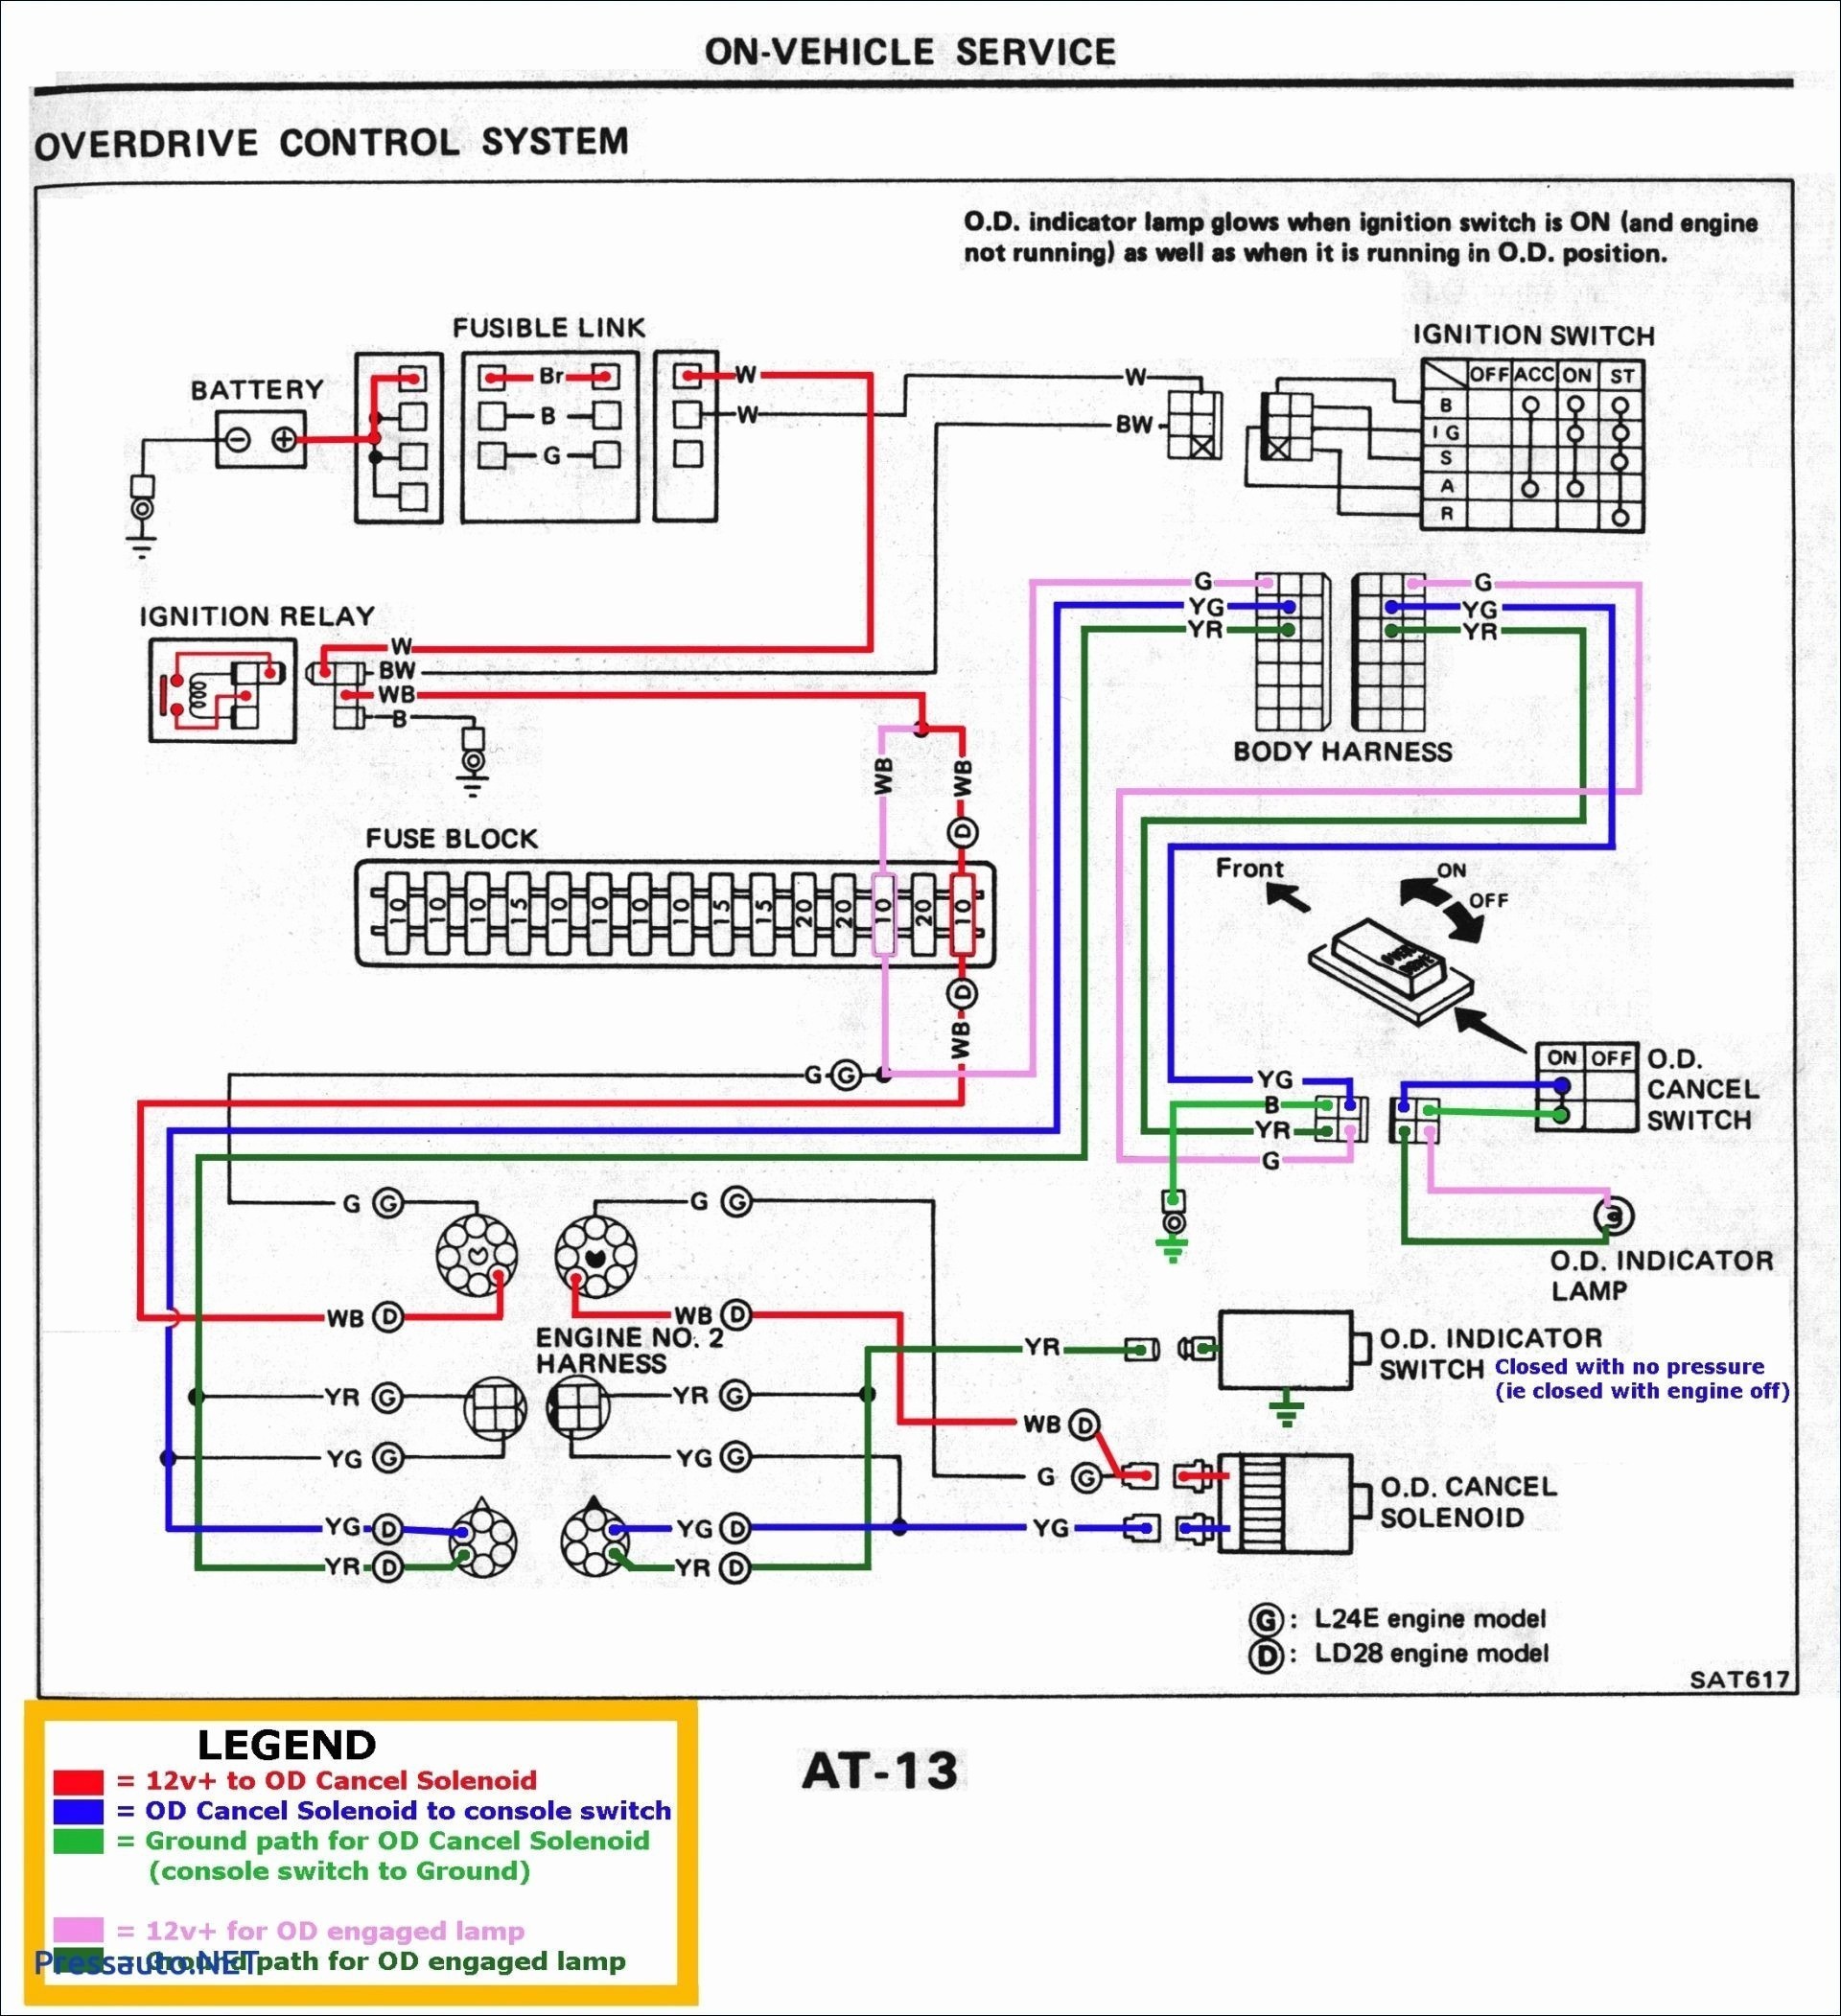 Wiring Diagram for Home Light Switch Refrence Wiring Diagram for Drag Car Save Wiring Diagram for